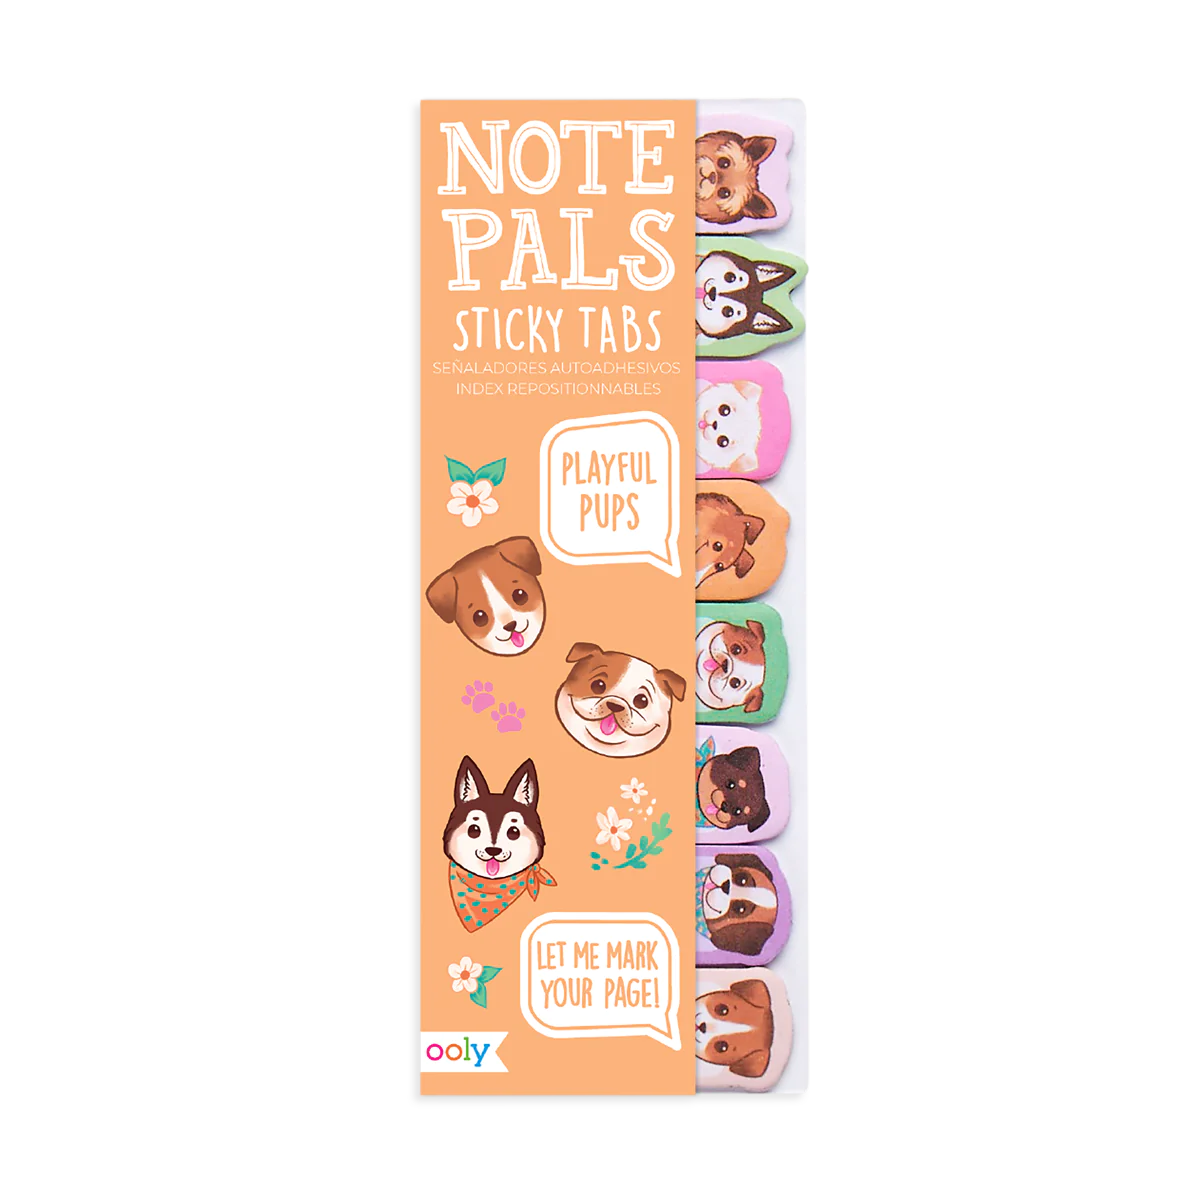 Notepals Sticky Tabs - Playful Pups